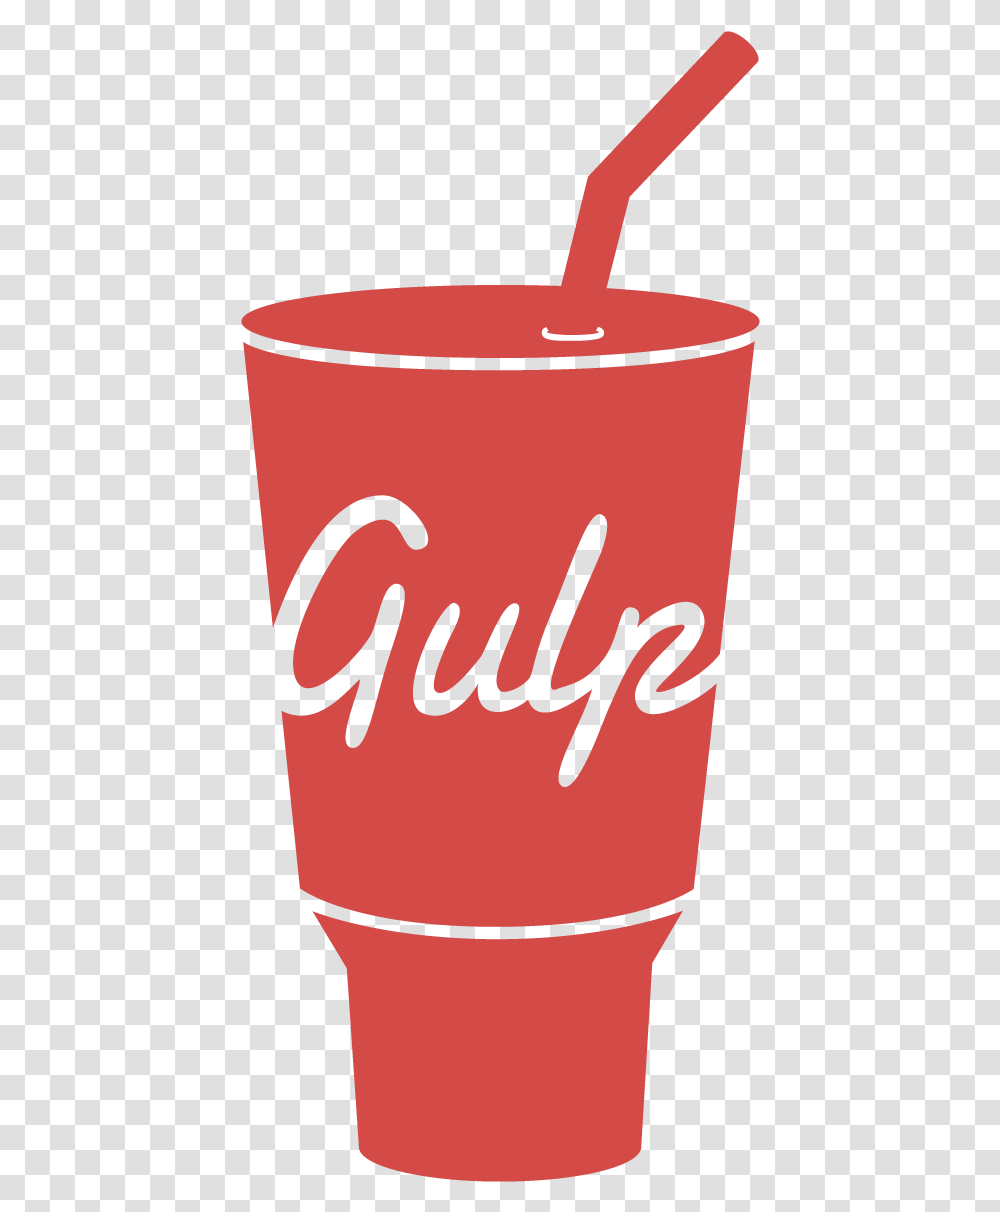 Minify Images With Gulp Gulp Logo Svg, Text, Cup, Tin, Coffee Cup Transparent Png